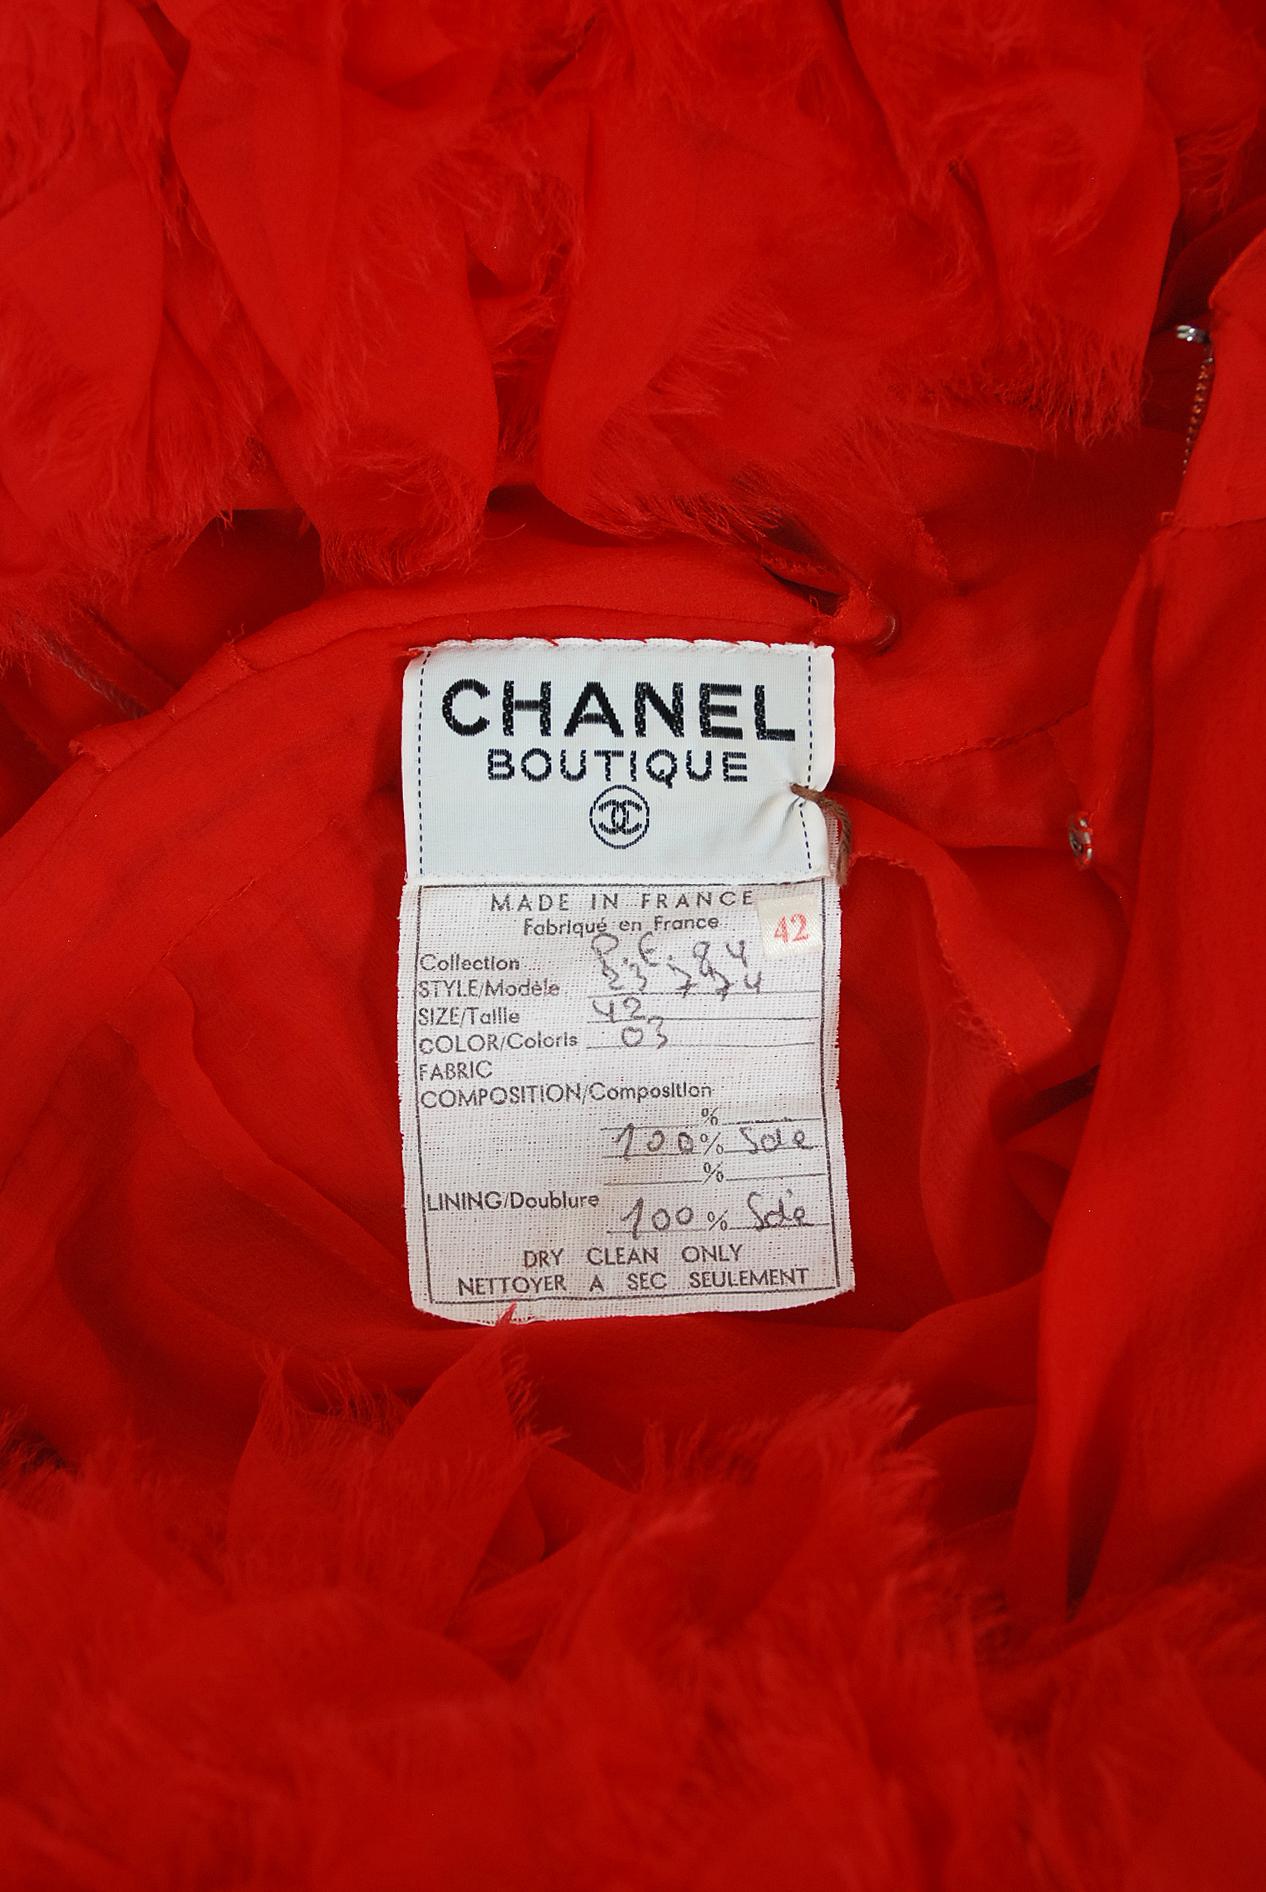 Vintage 1984 Chanel by Karl Lagerfeld Runway Red Silk Chiffon Ruffle-Sleeve Gown 9